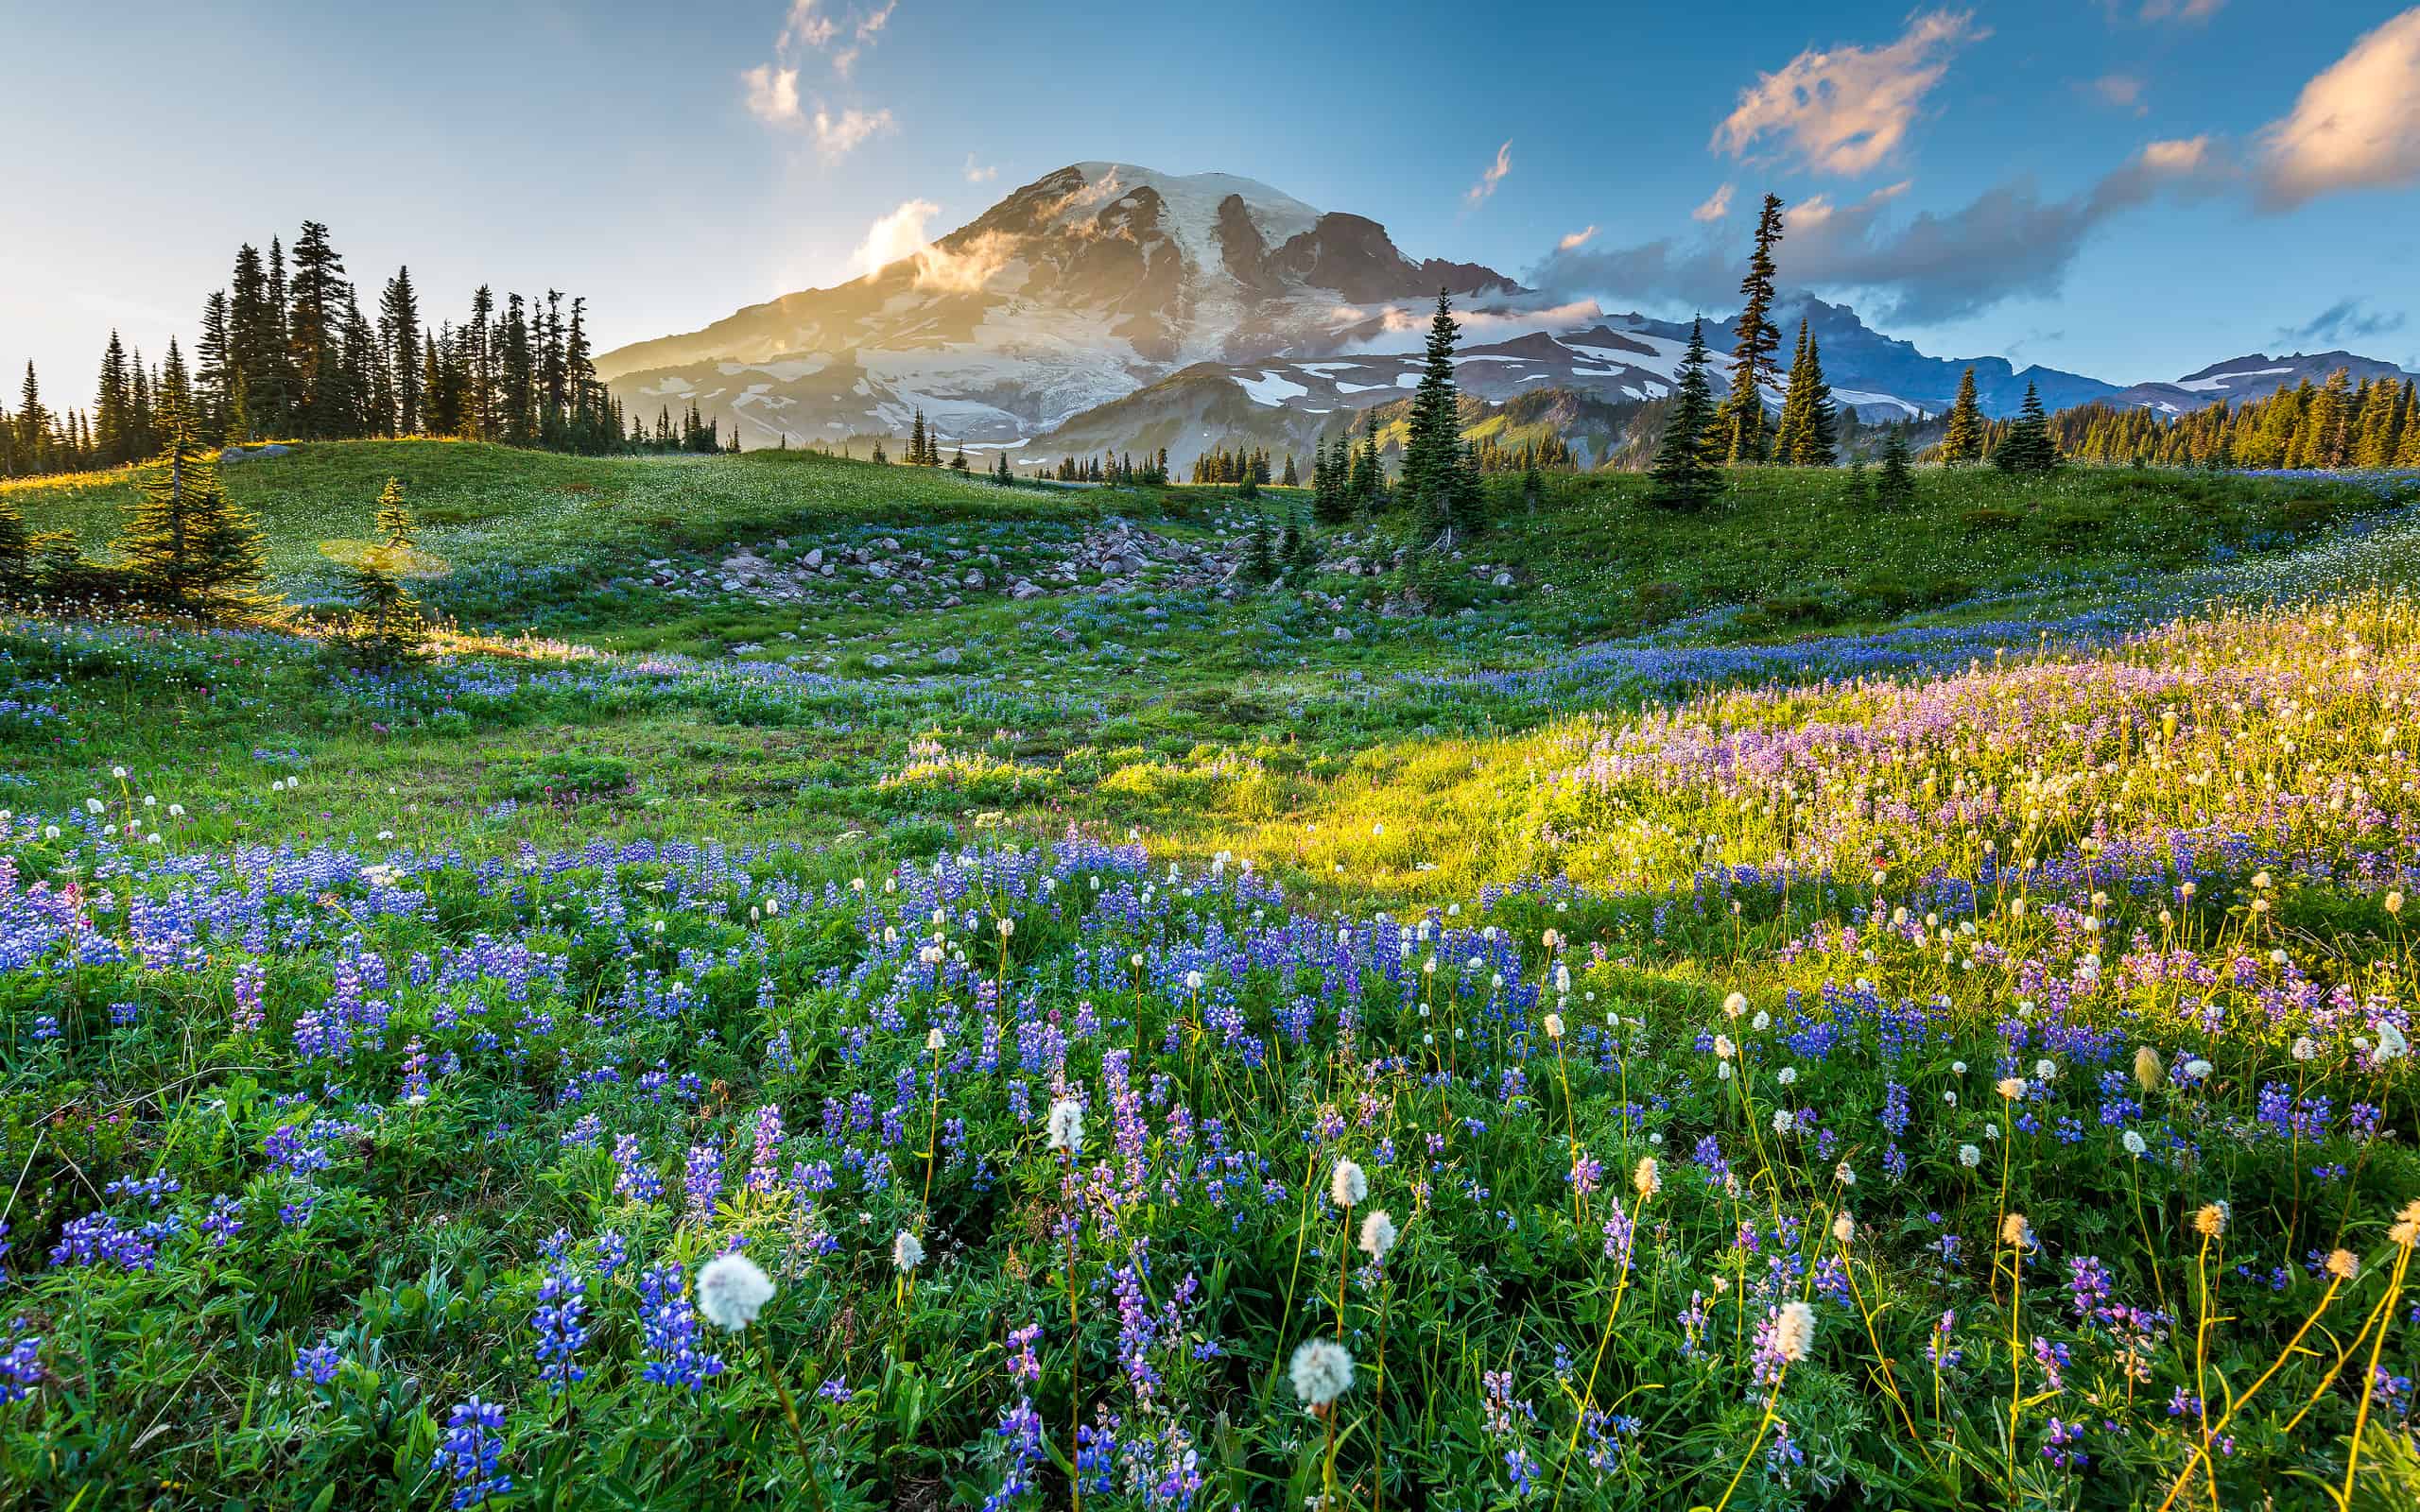 Wild flowers in the grass on a background of mountains.